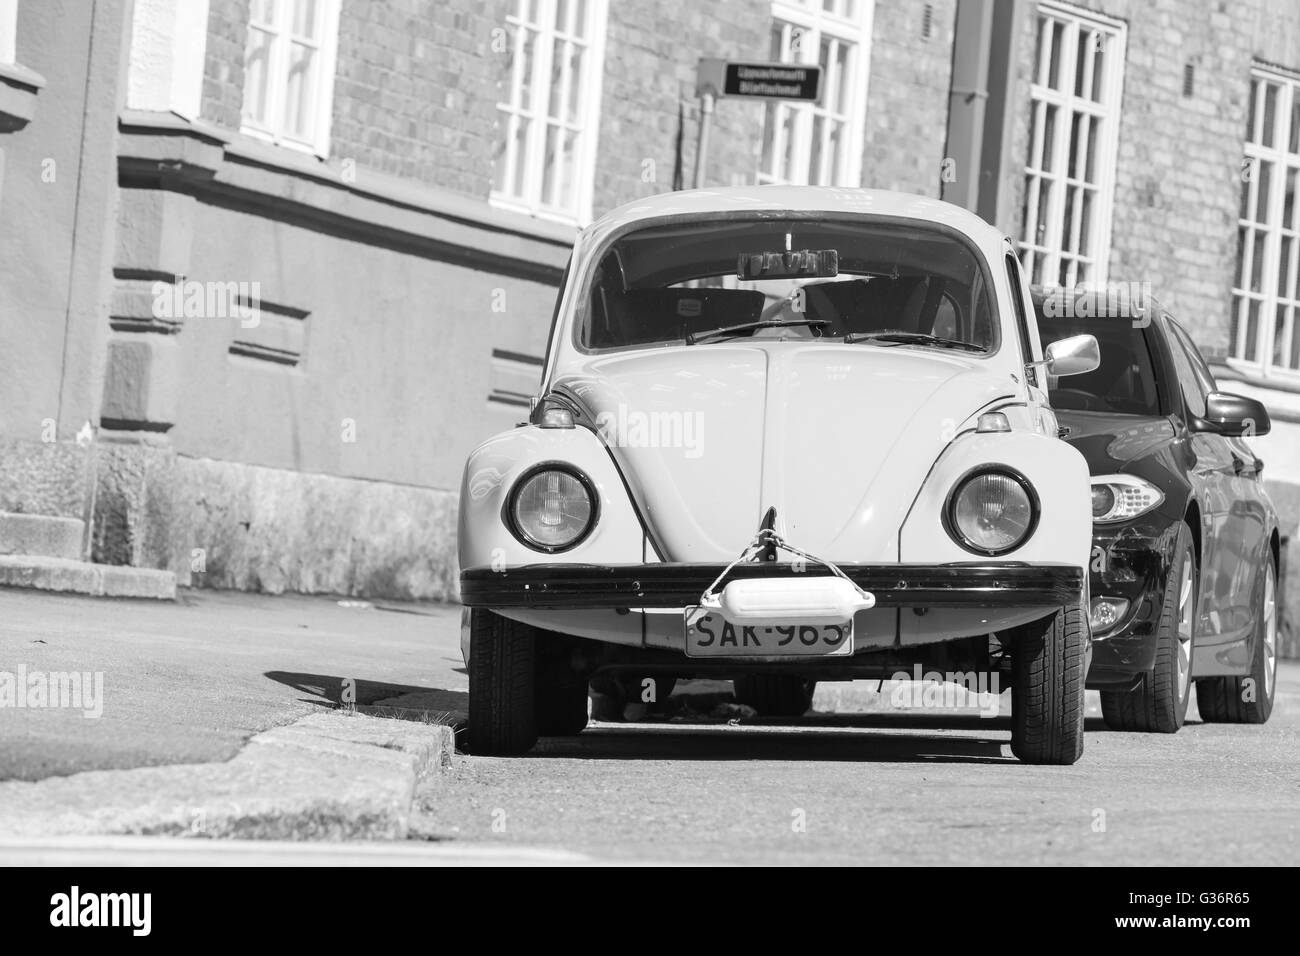 Helsinki, Finland - May 7, 2016: Old  Volkswagen beetle, front view, black and white Stock Photo